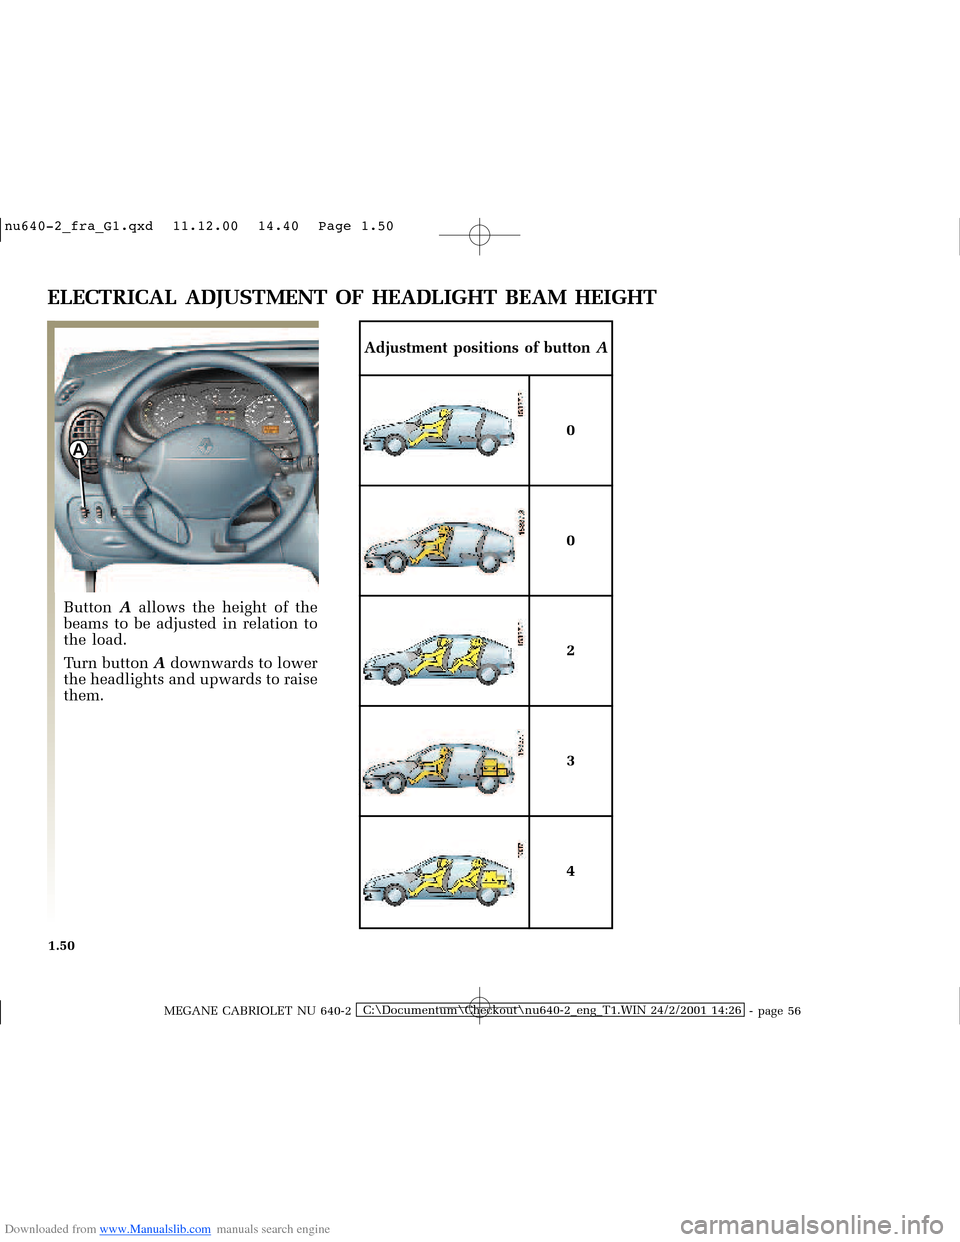 RENAULT MEGANE 2000 X64 / 1.G Workshop Manual Downloaded from www.Manualslib.com manuals search engine A
�Q�X������B�I�U�D�B�*���T�[�G� � ��������� � ������ � �3�D�J�H� ����
MEGANE CABRIOLET NU 640-2C:\Documentum\Ch